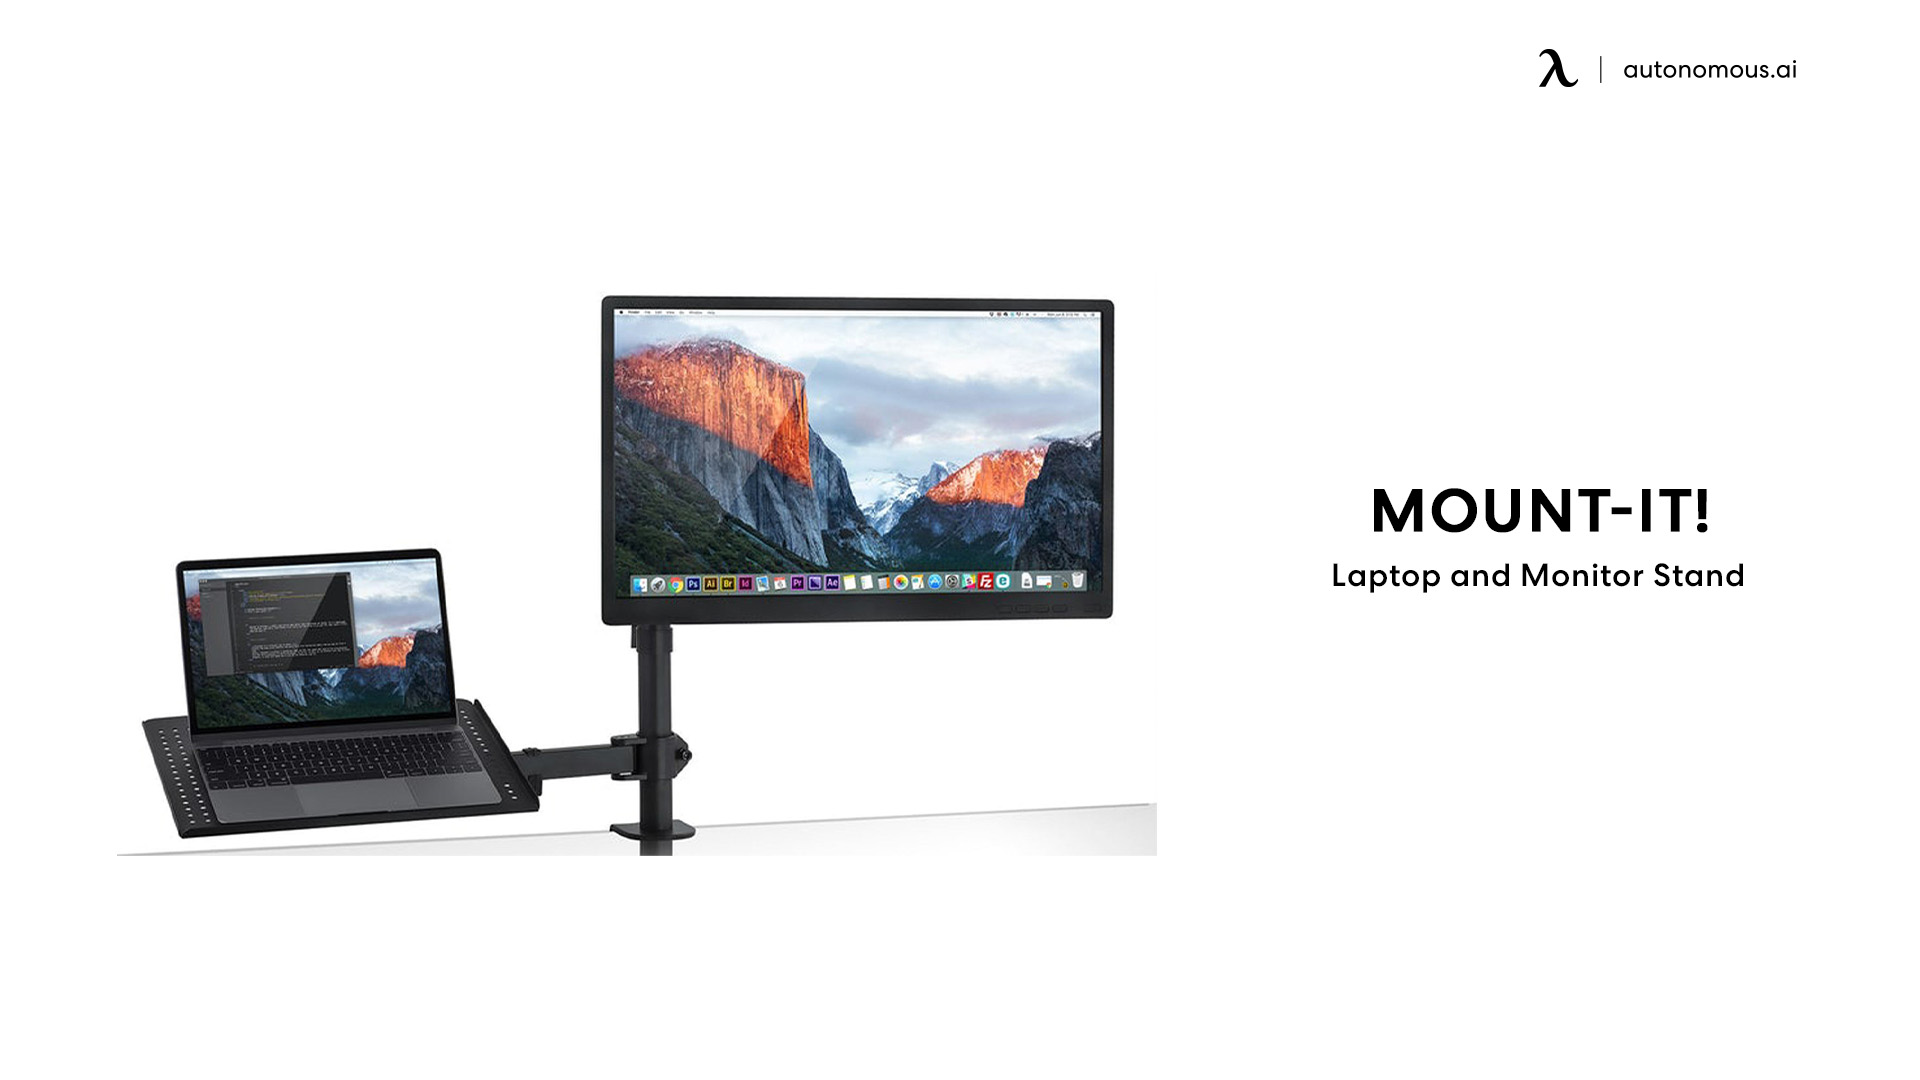 Laptop and Monitor Stand by Mount-It! cool computer gadgets